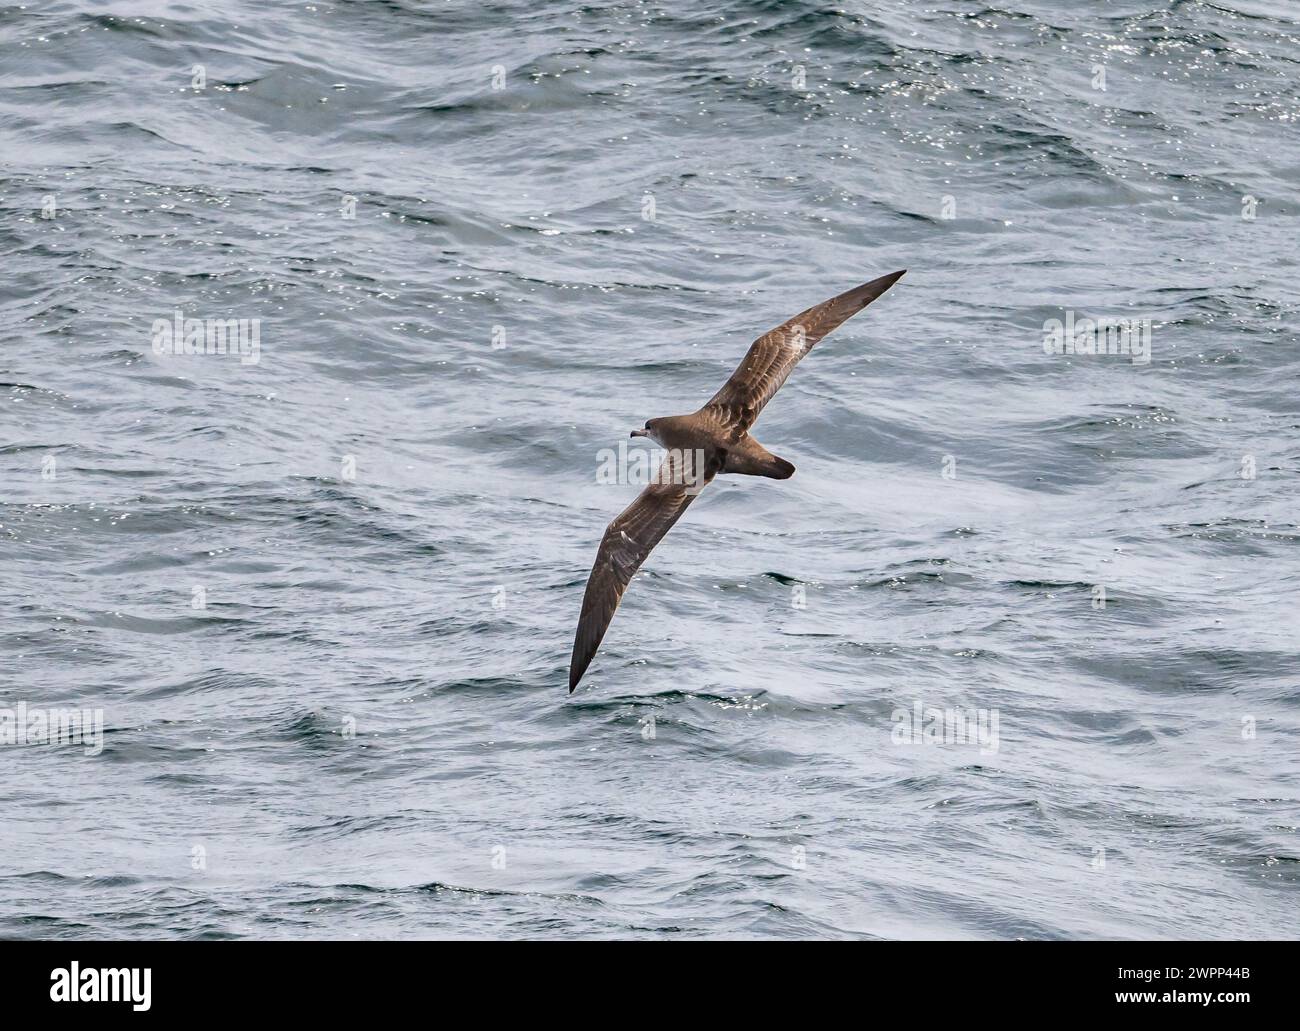 A Pink-footed Shearwater (Ardenna creatopus) flying over ocean. Pacific Ocean, off the coast of Chile. Stock Photo